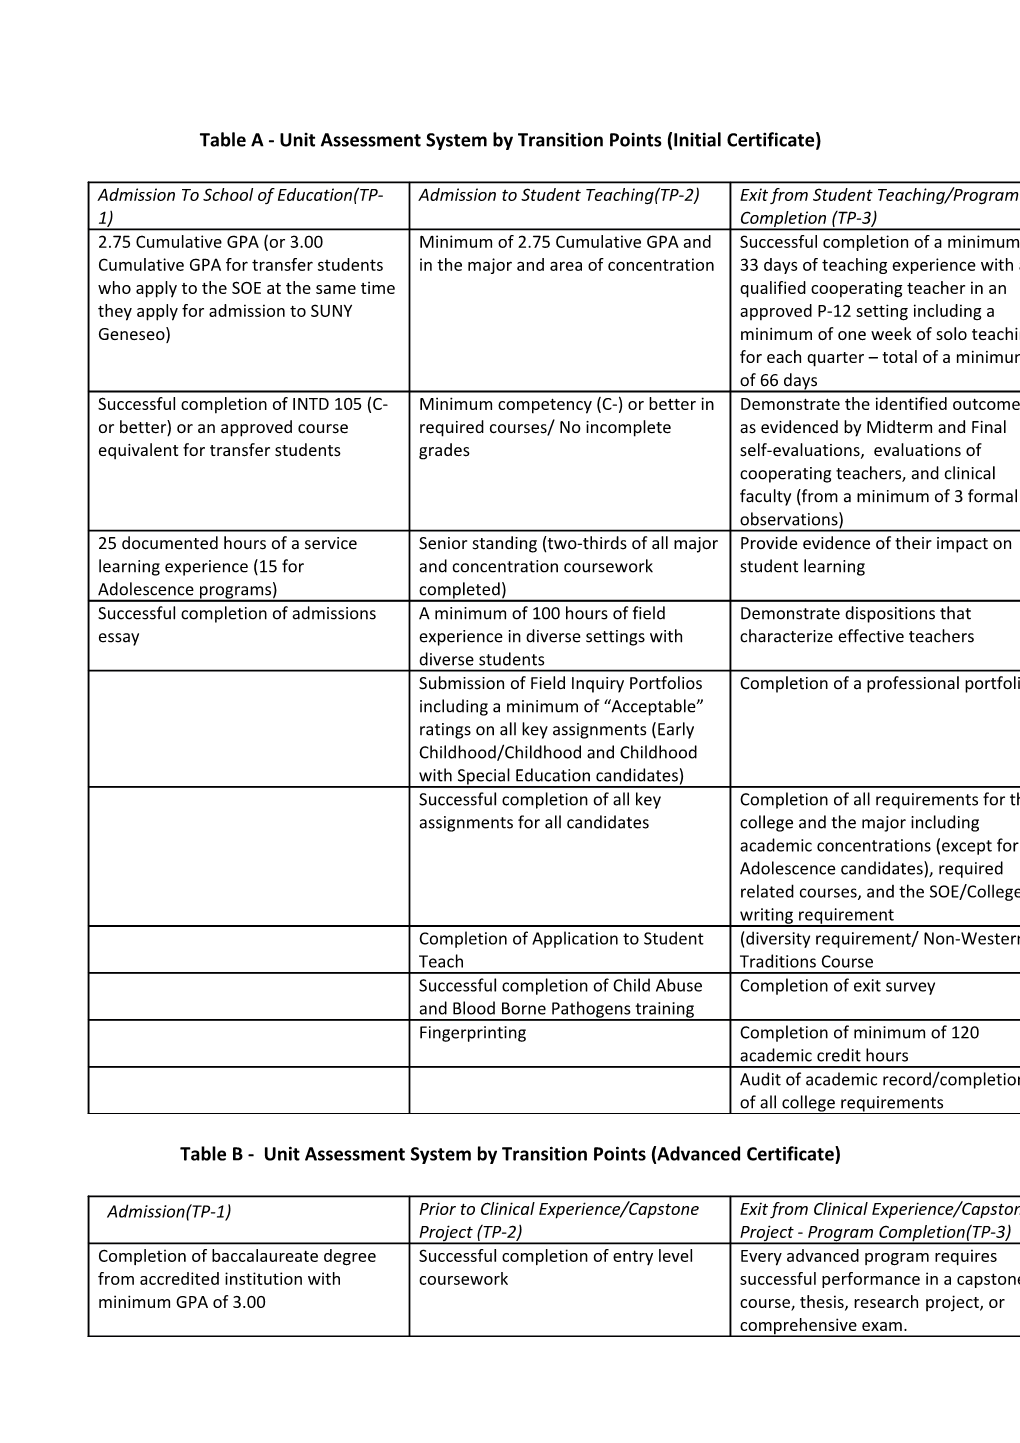 Table a - Unit Assessment System by Transition Points (Initial Certificate)